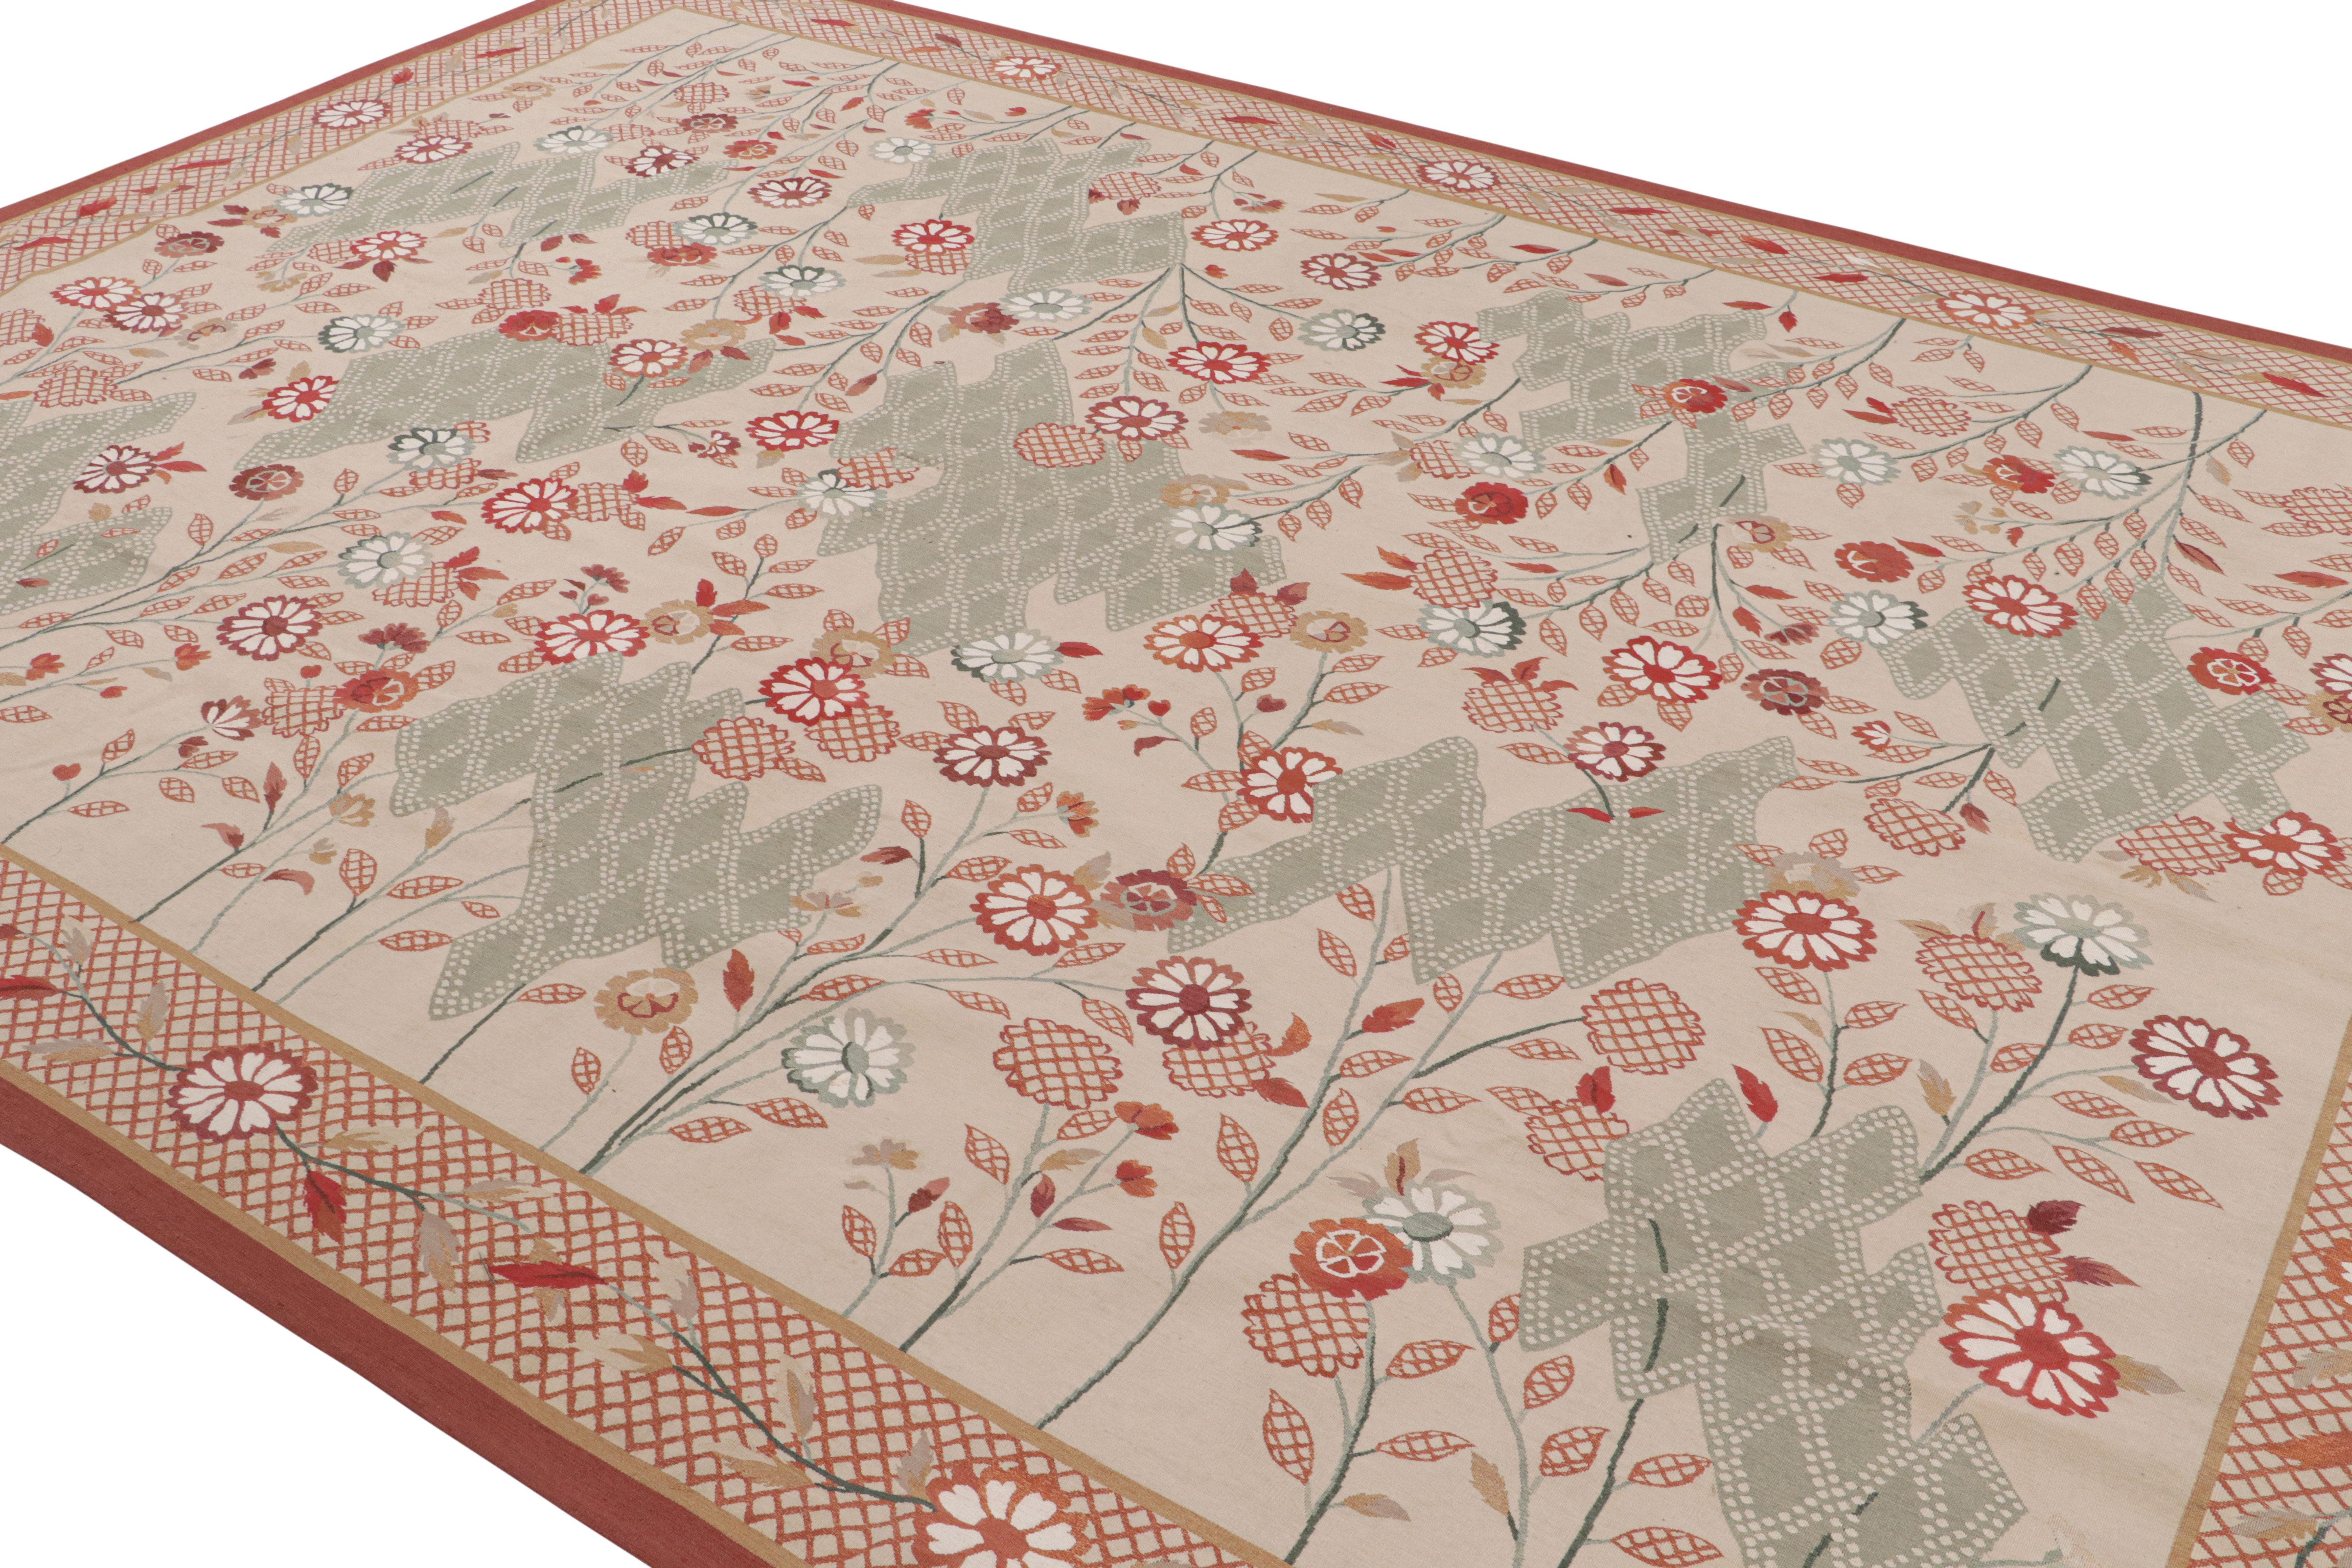 Hand-Woven Antique Aubusson Rug with Beige-Brown, Green and Red Florals, from Rug & Kilim For Sale